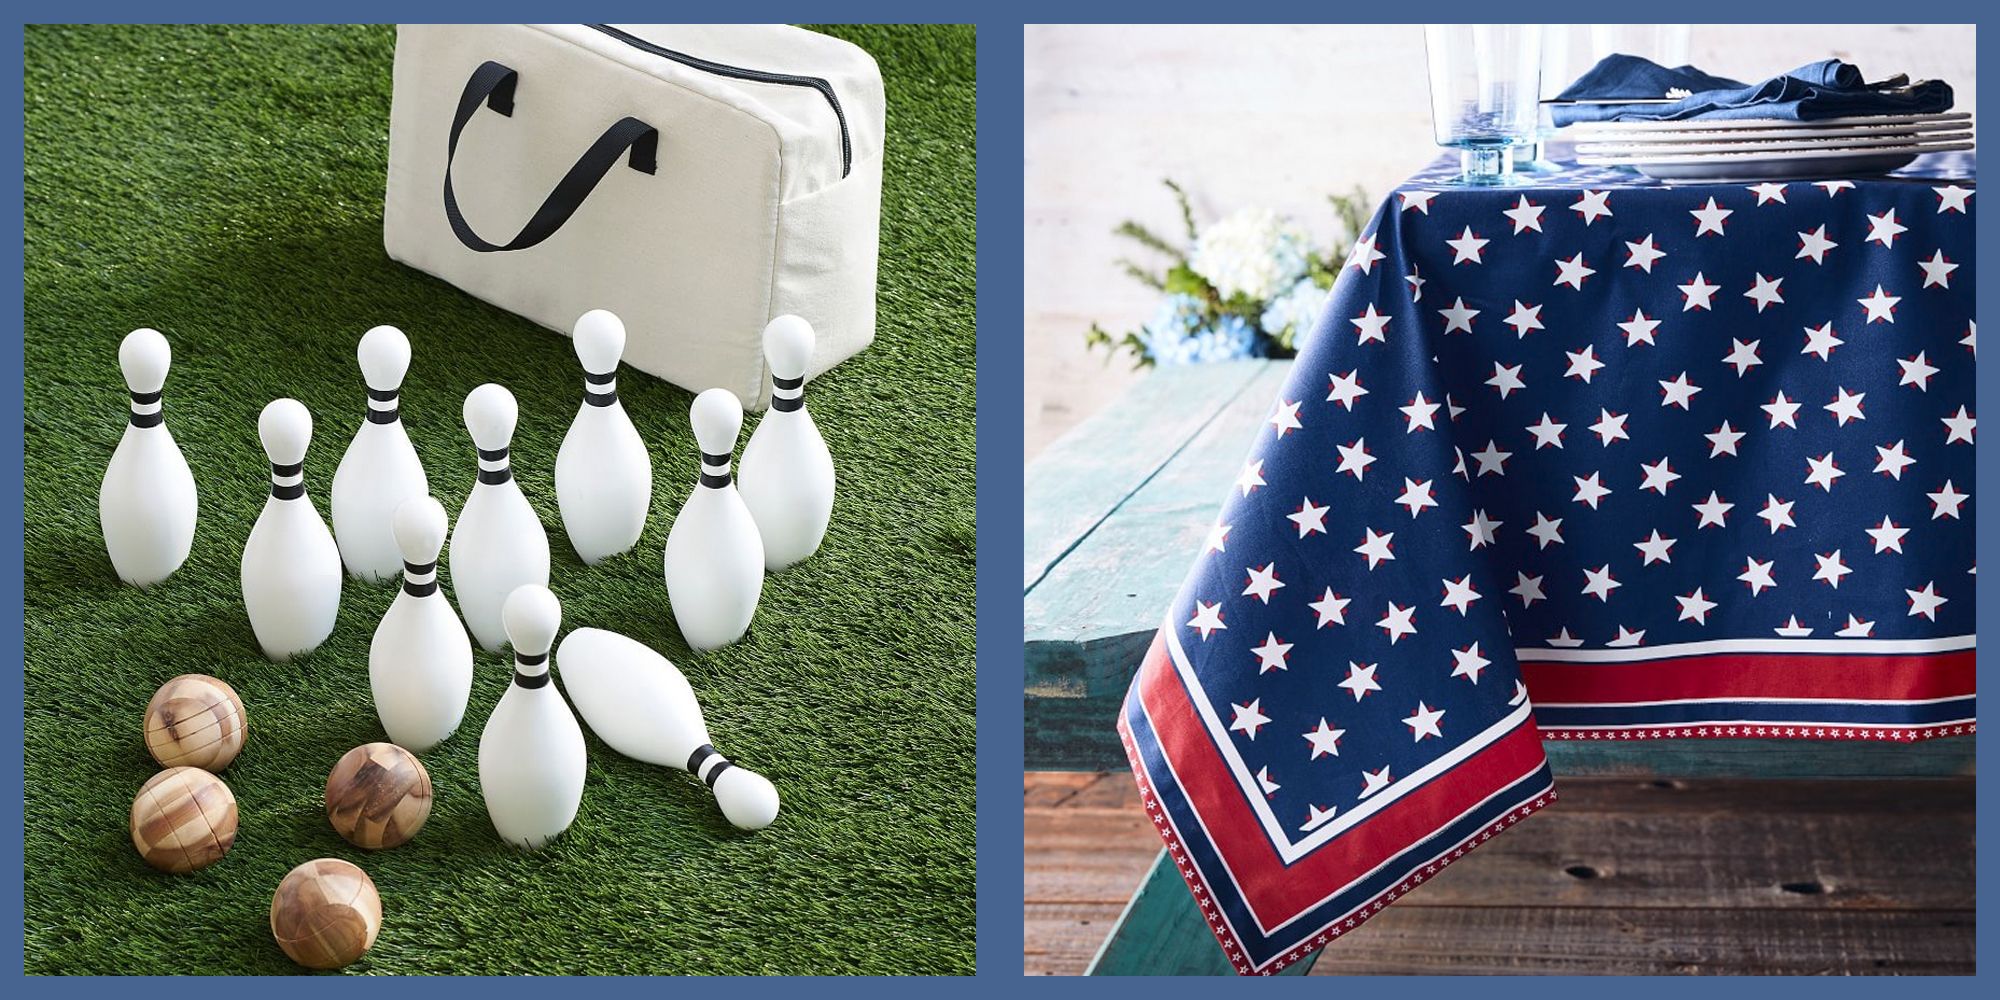 Patriotic Essentials for Hosting a Fourth of July Party